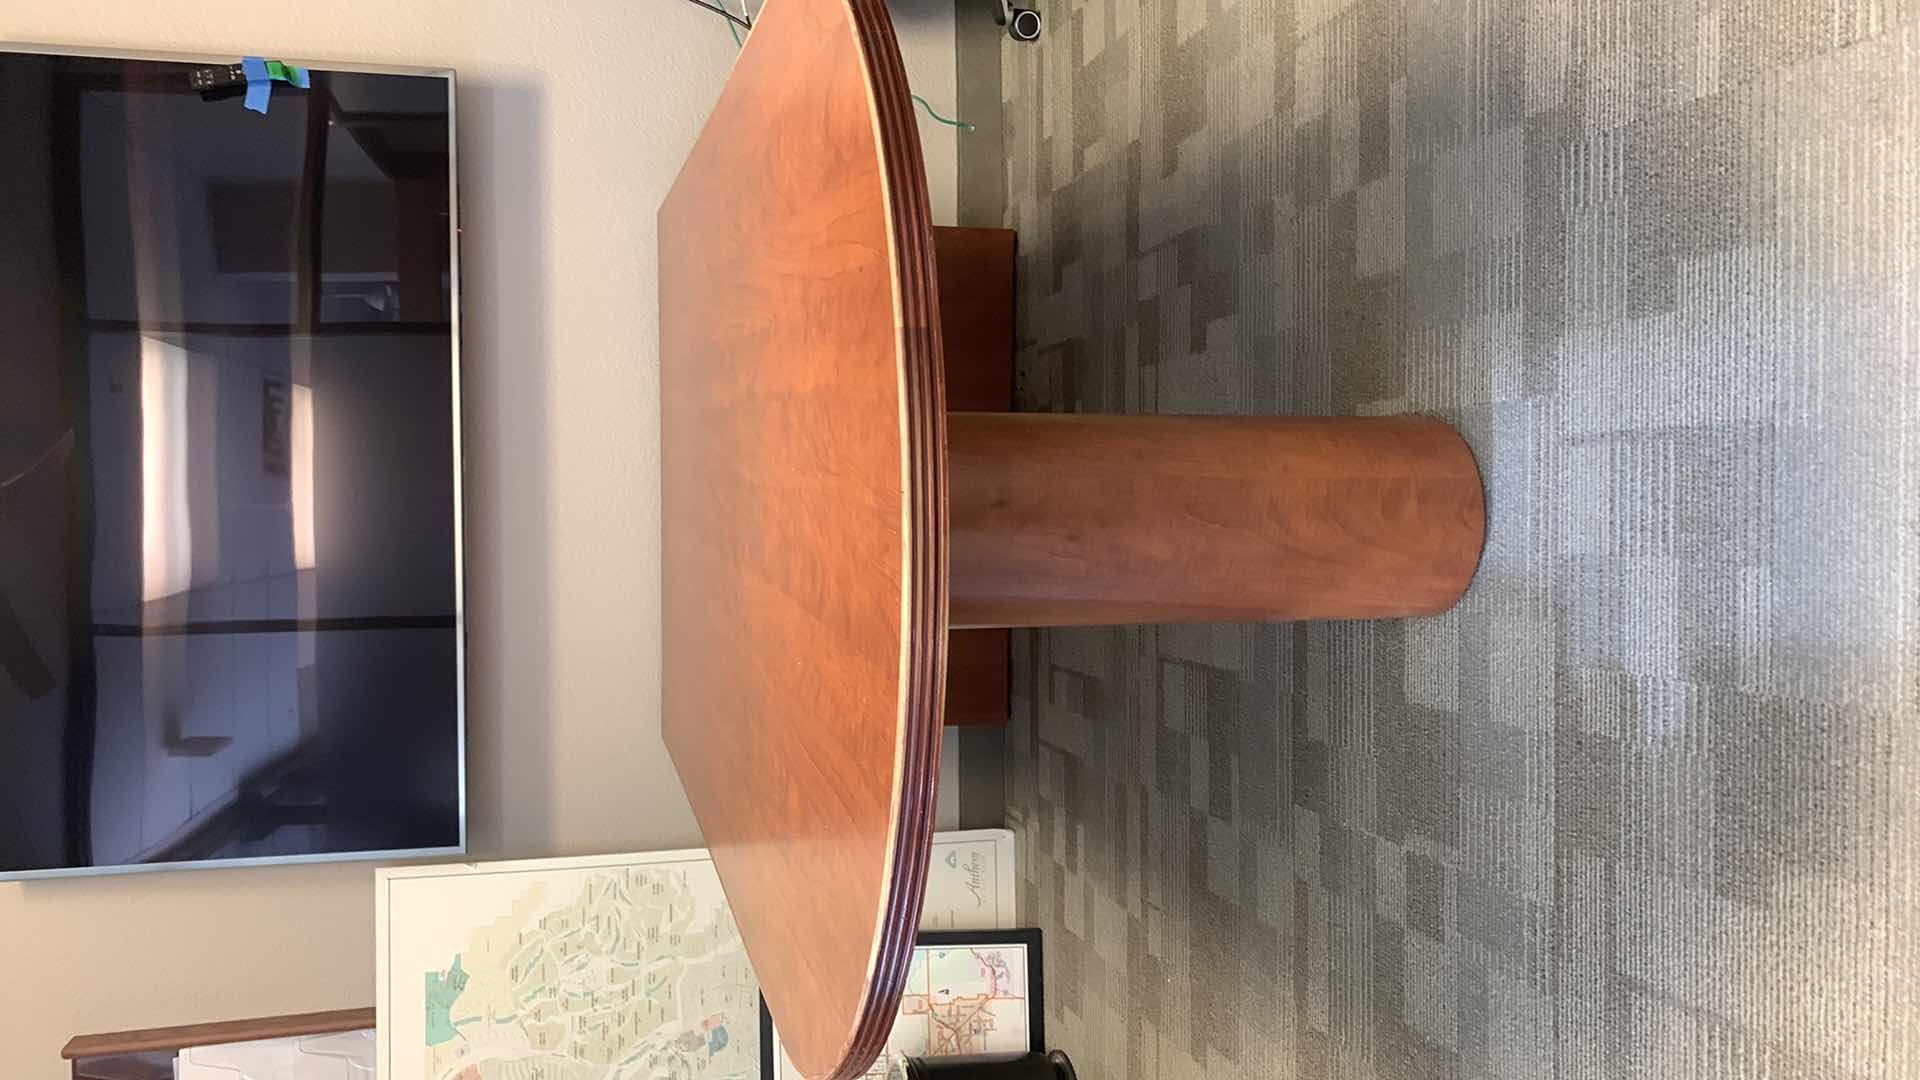 Photo 3 of WOOD OFFICE CONFERENCE TABLE 41.5” x 77” x H29”